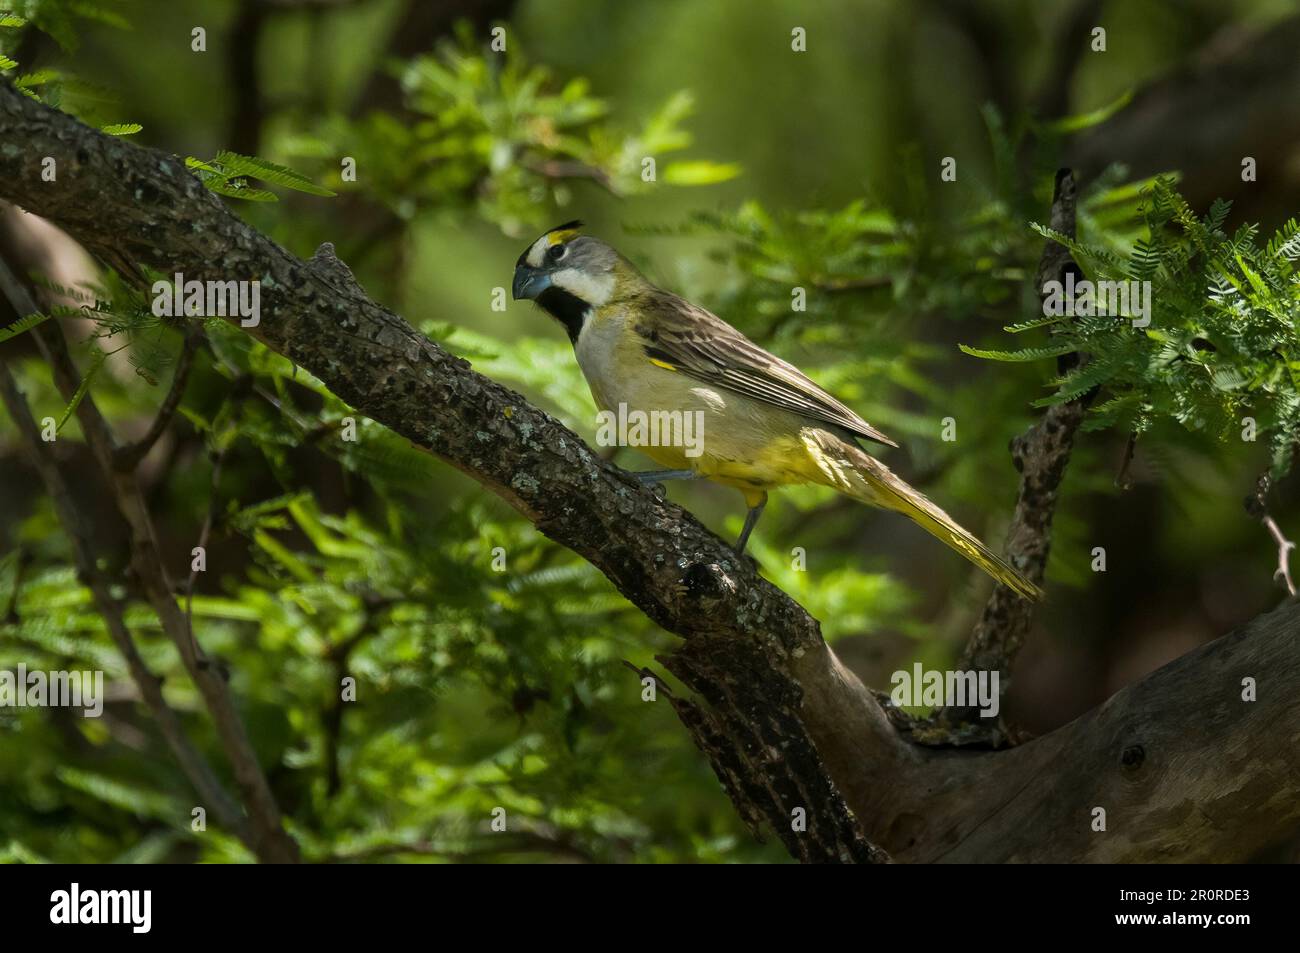 Yellow Cardinal, Endemic Endangered Species in South America, Calden Forest, La Pampa Province, Patagonia, Argentina. Stock Photo